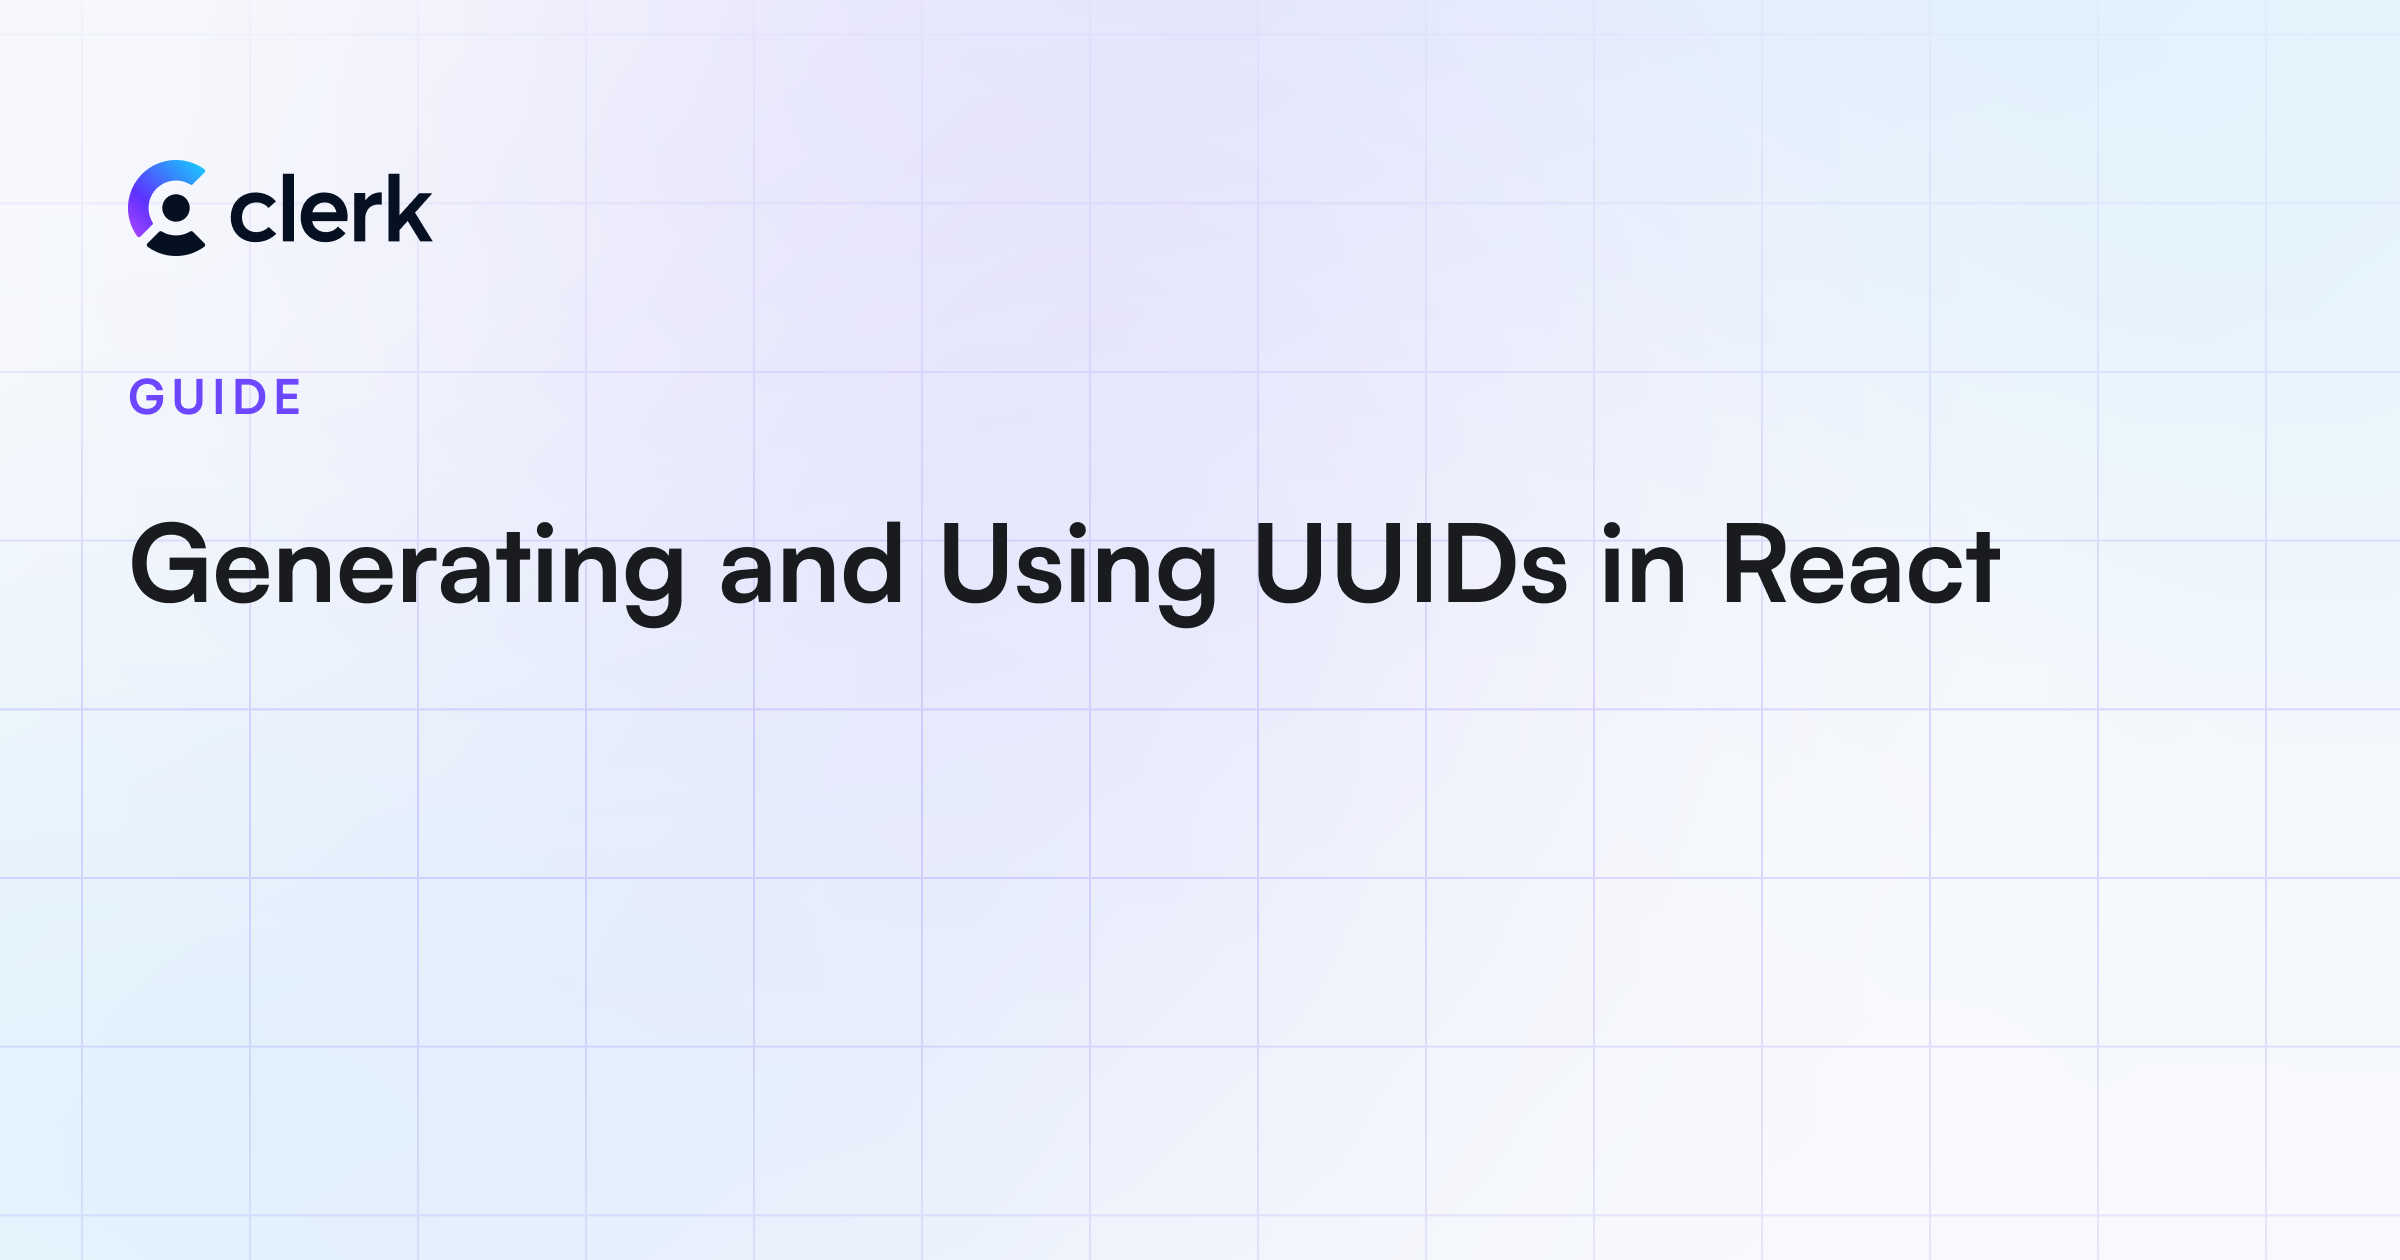 Generating and Using UUIDs in React